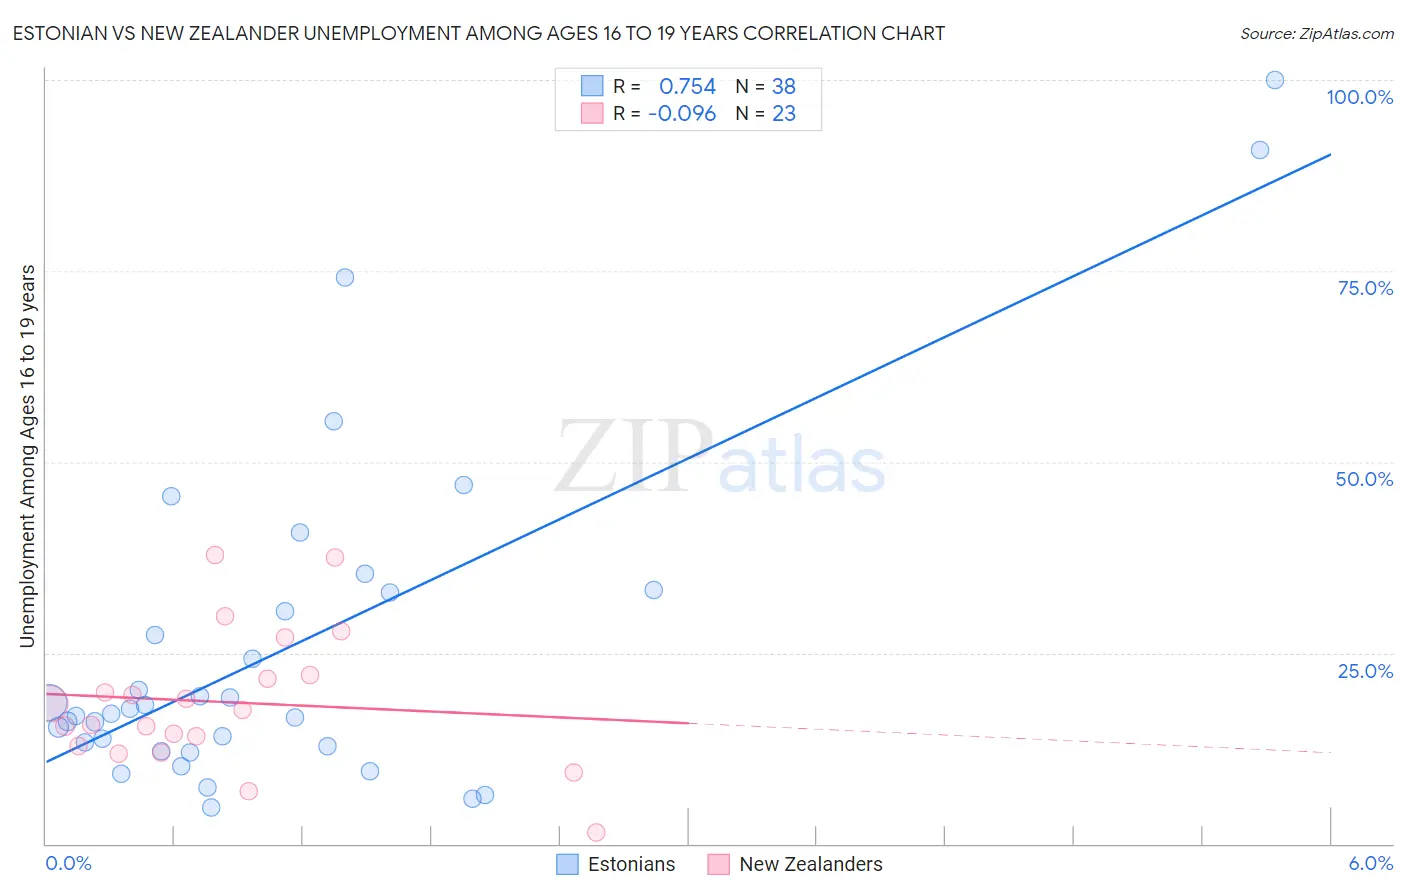 Estonian vs New Zealander Unemployment Among Ages 16 to 19 years